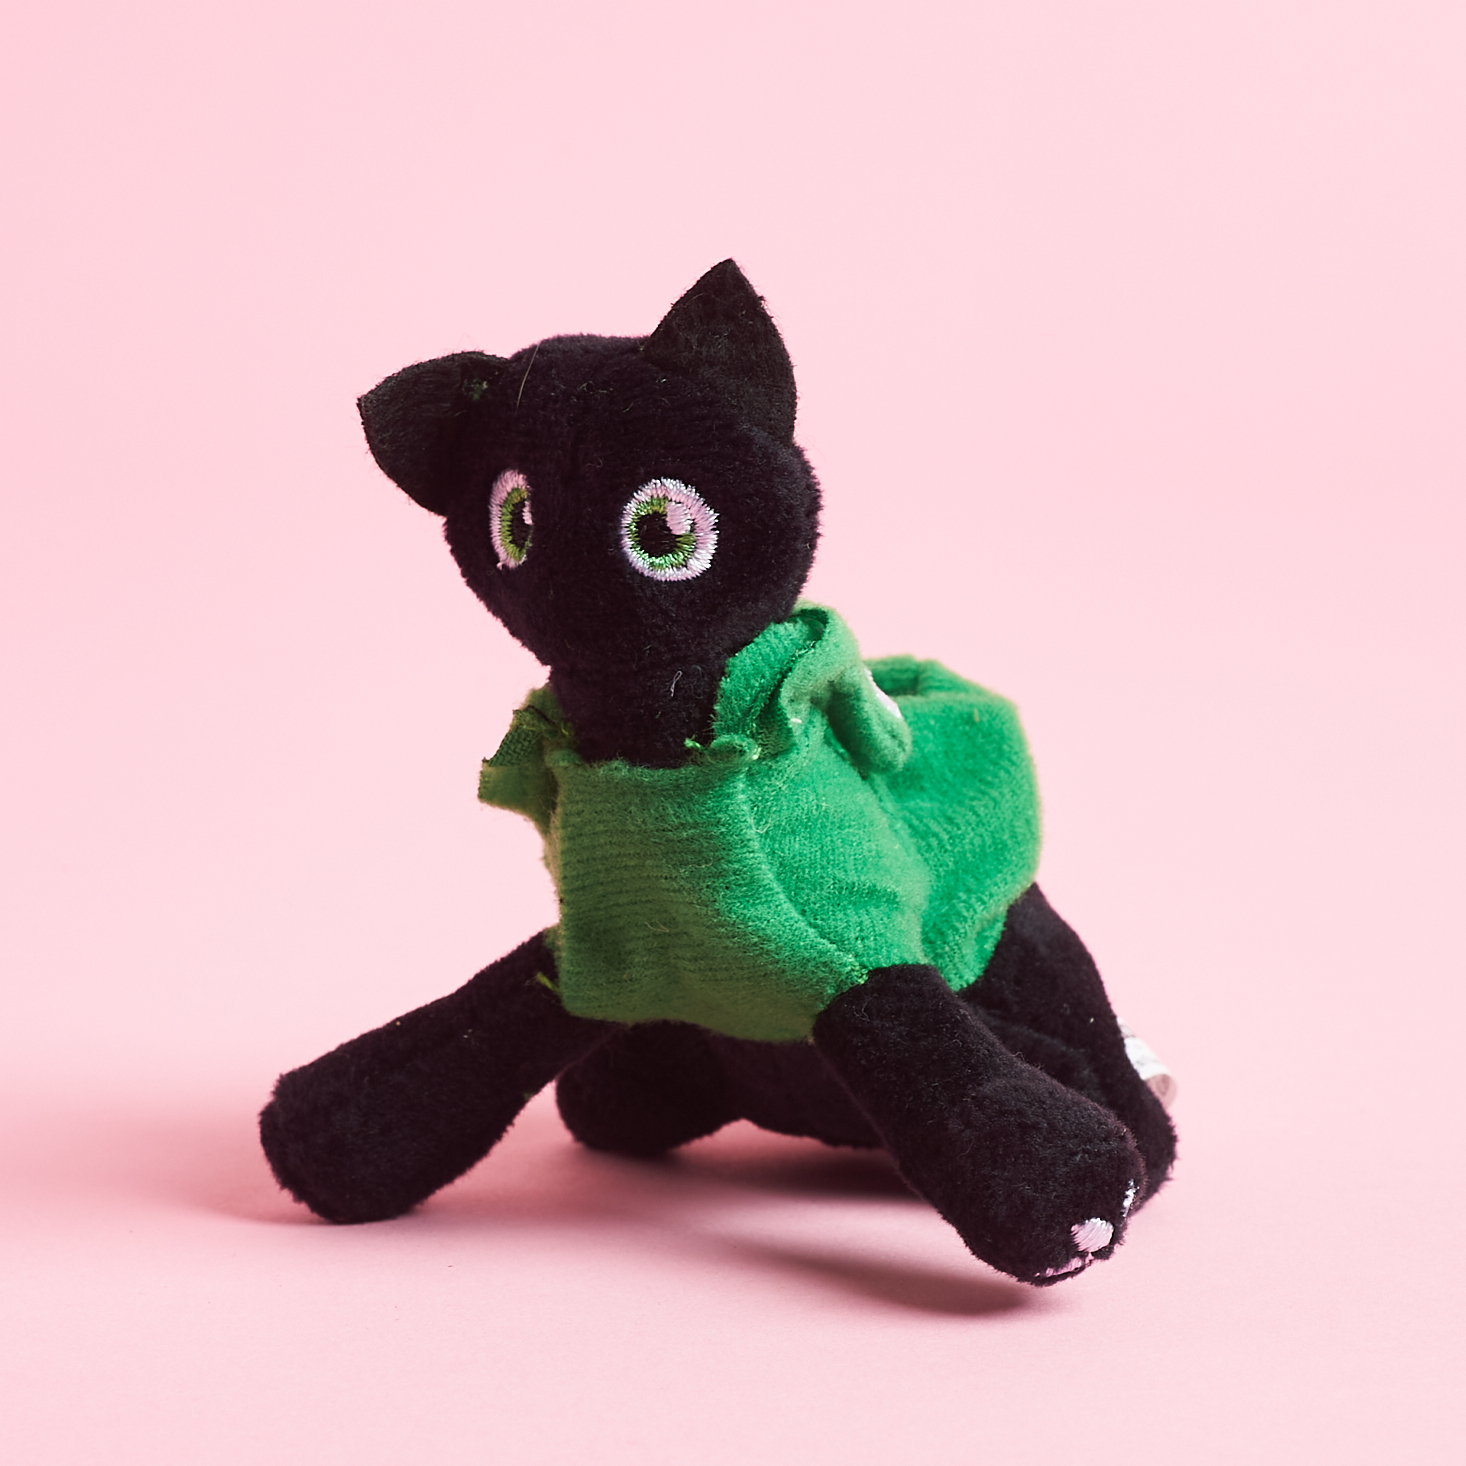 alternate view black cat toy wearing frog costume